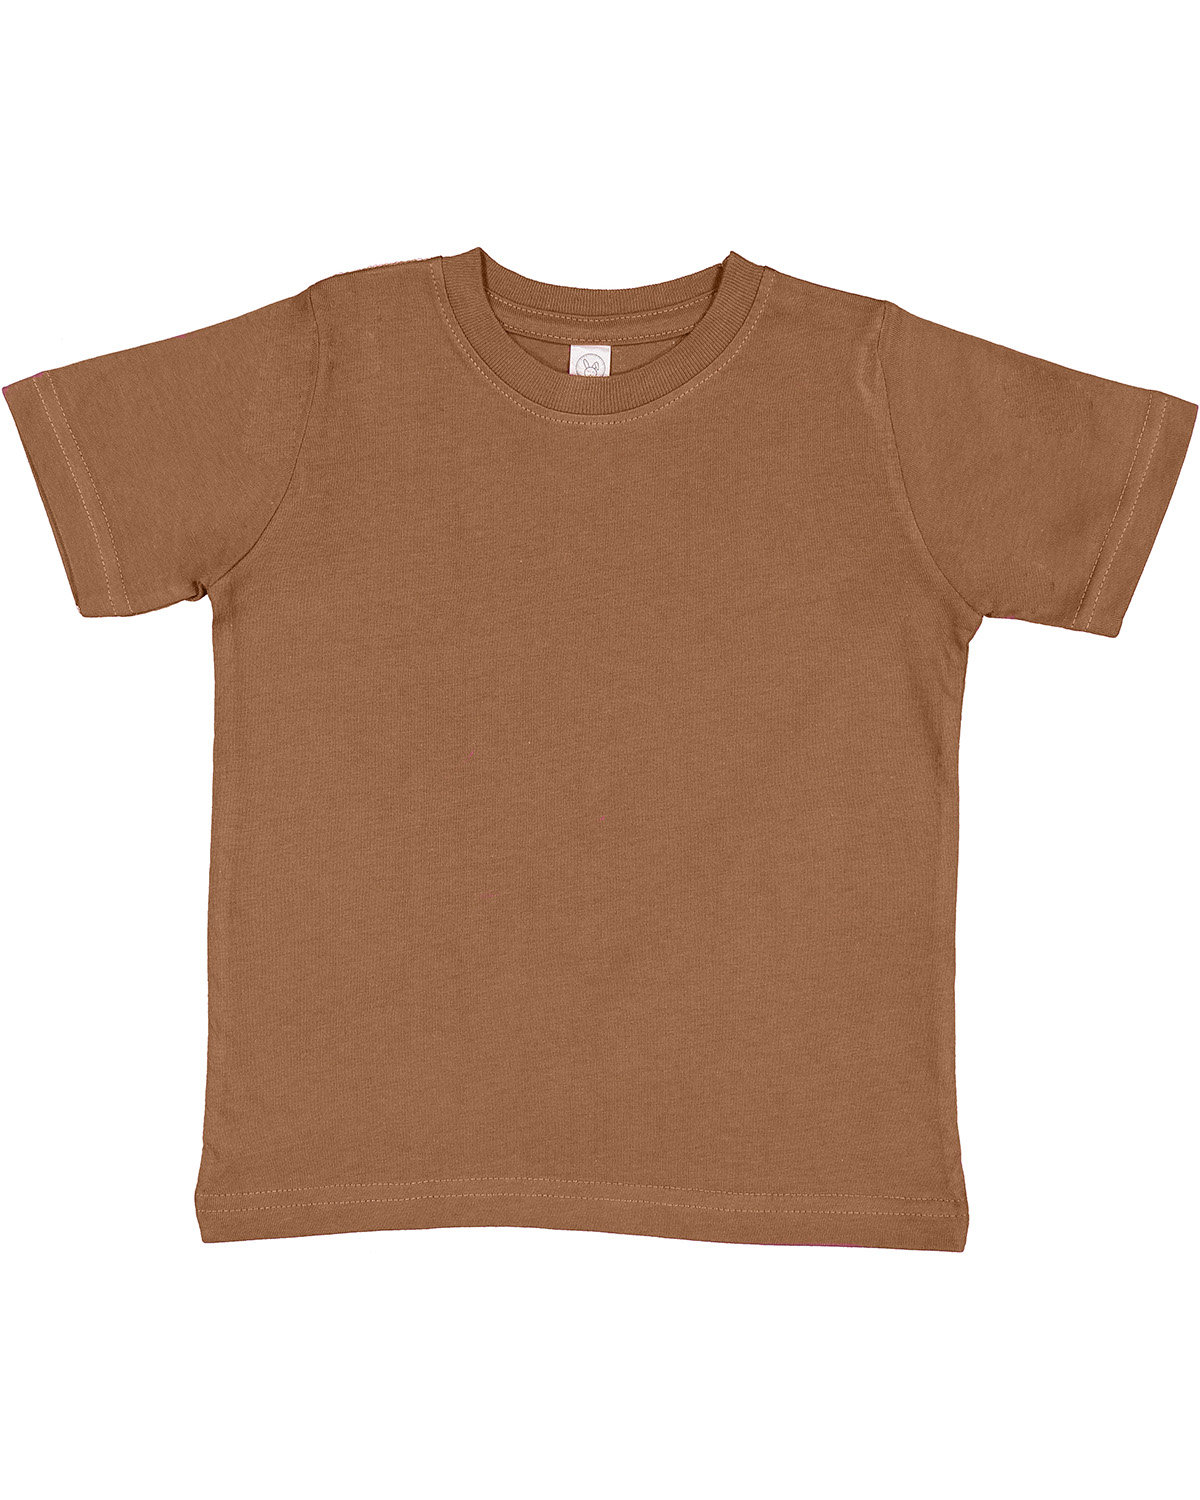 Rabbit Skins Toddler Fine Jersey T-Shirt COYOTE BROWN 